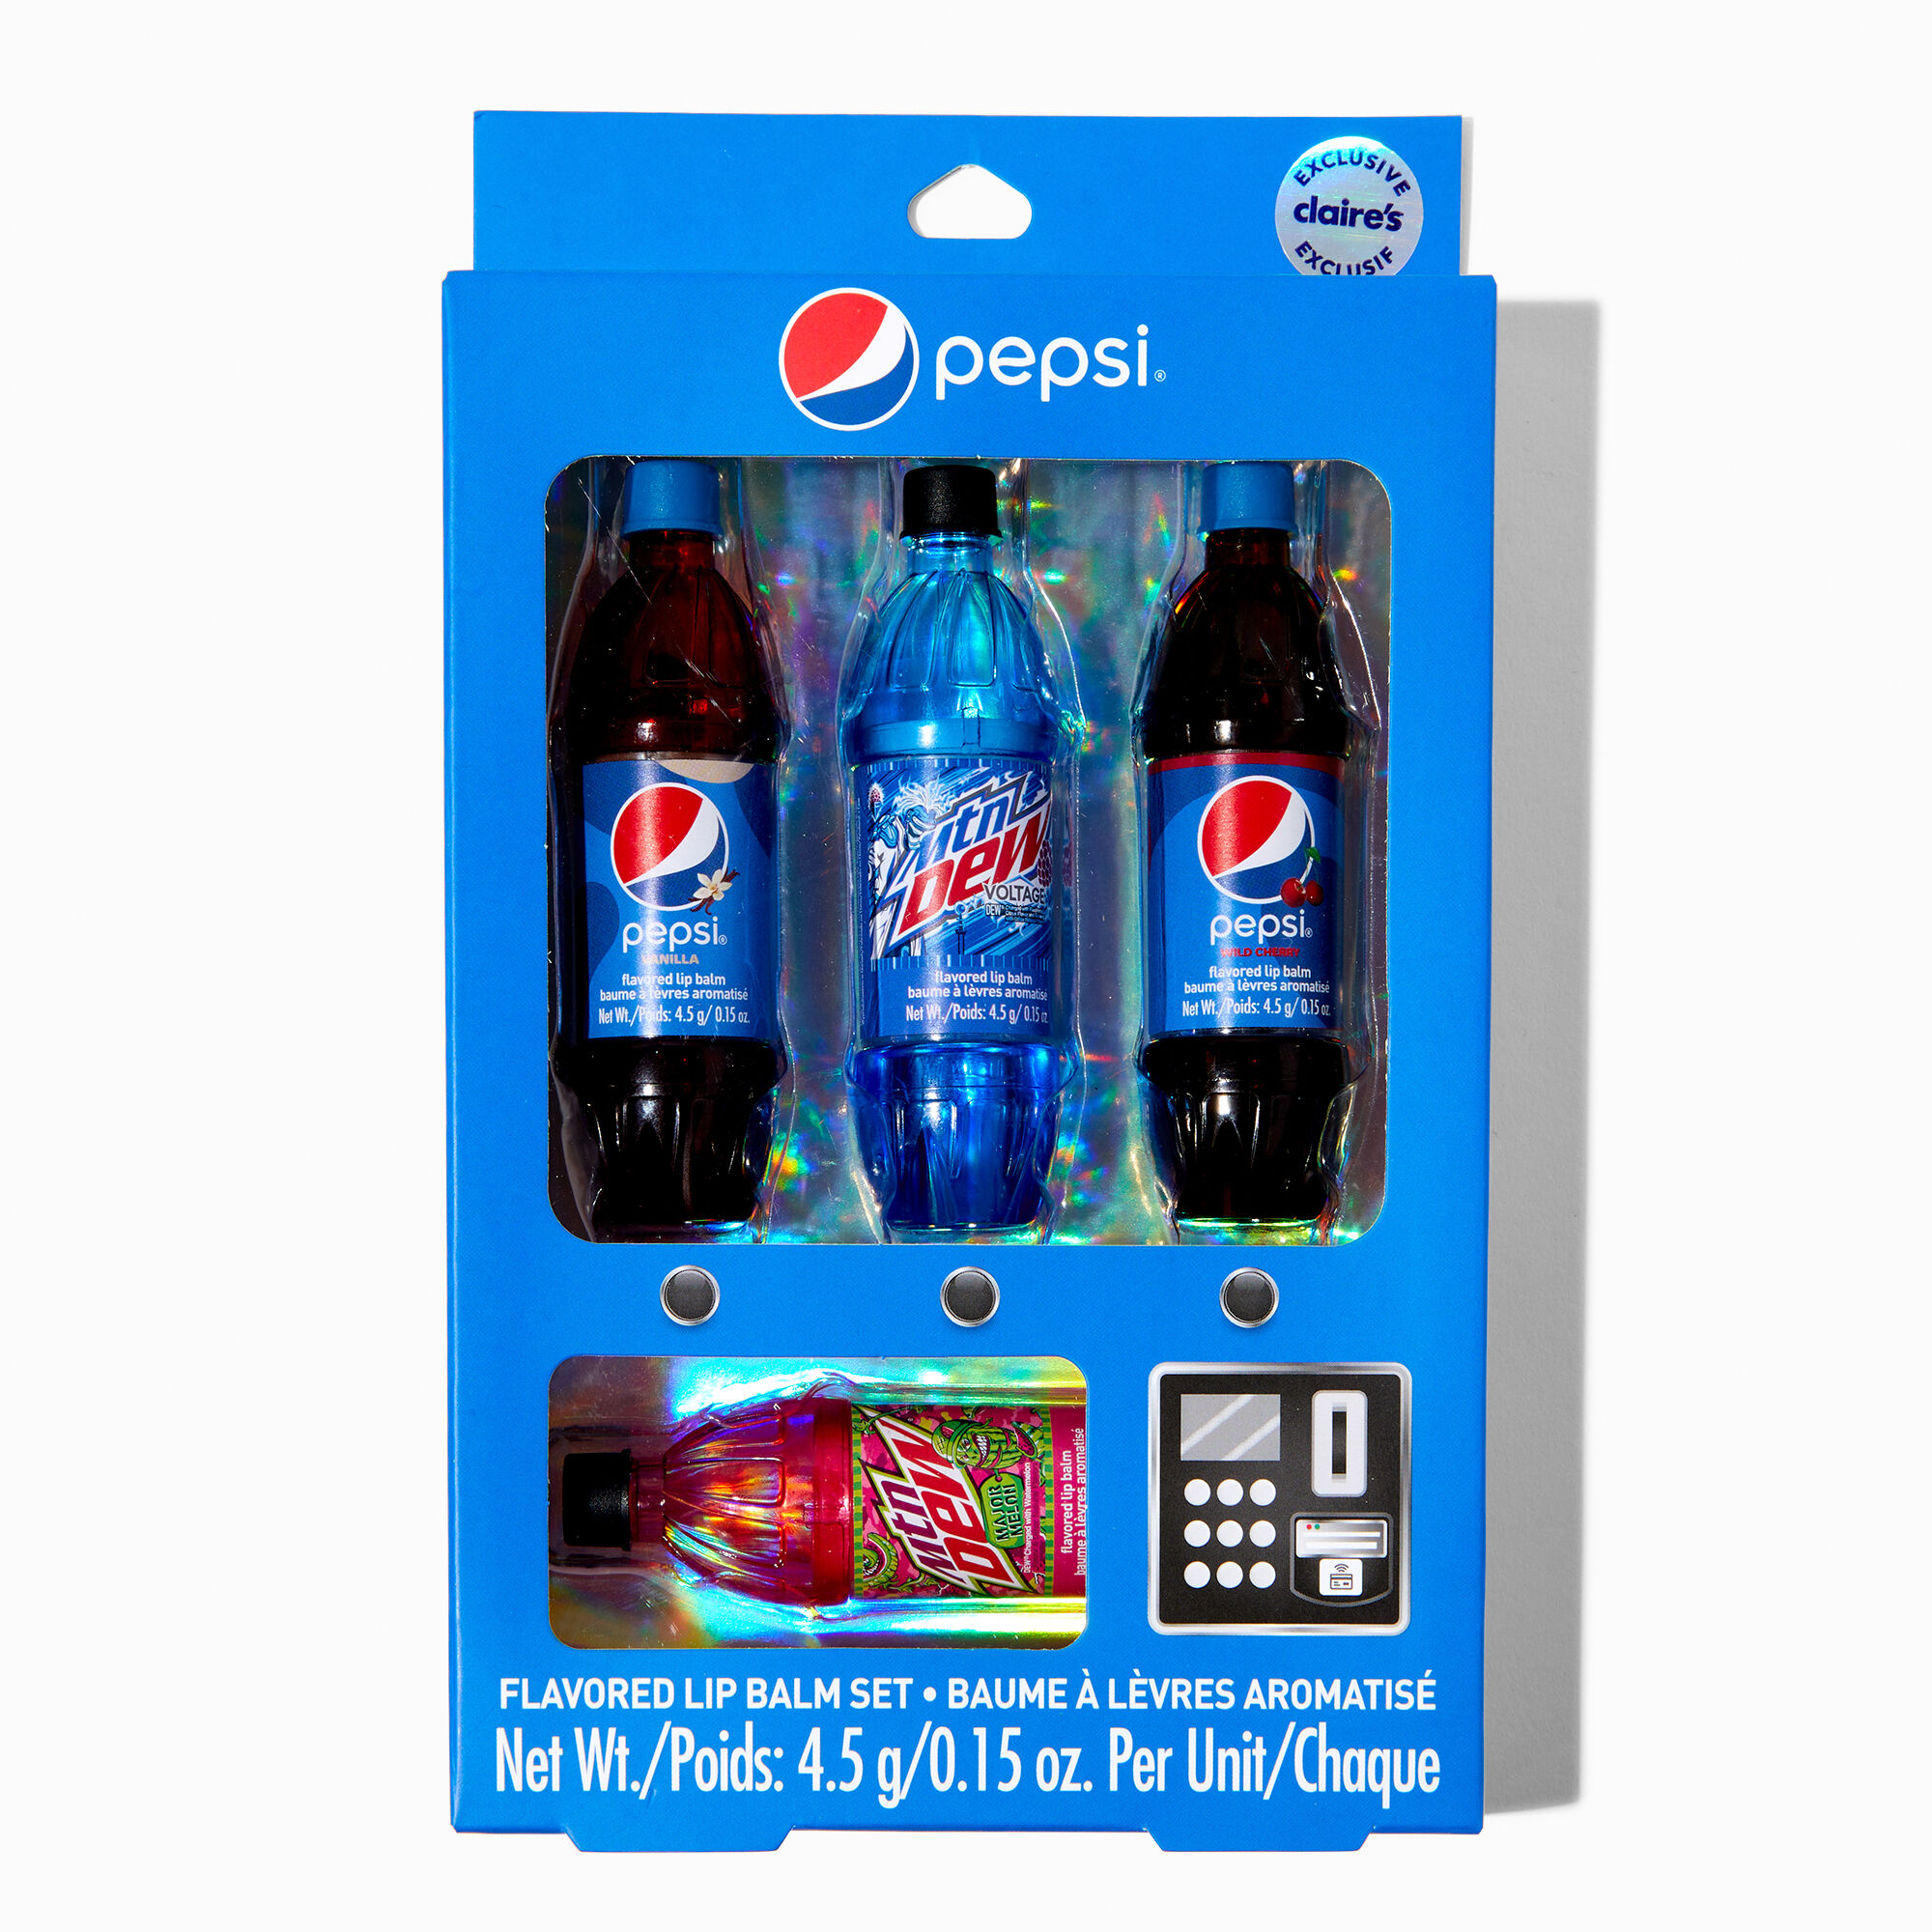 View Pepsi Claires Exclusive Flavored Lip Balm Set 4 Pack information